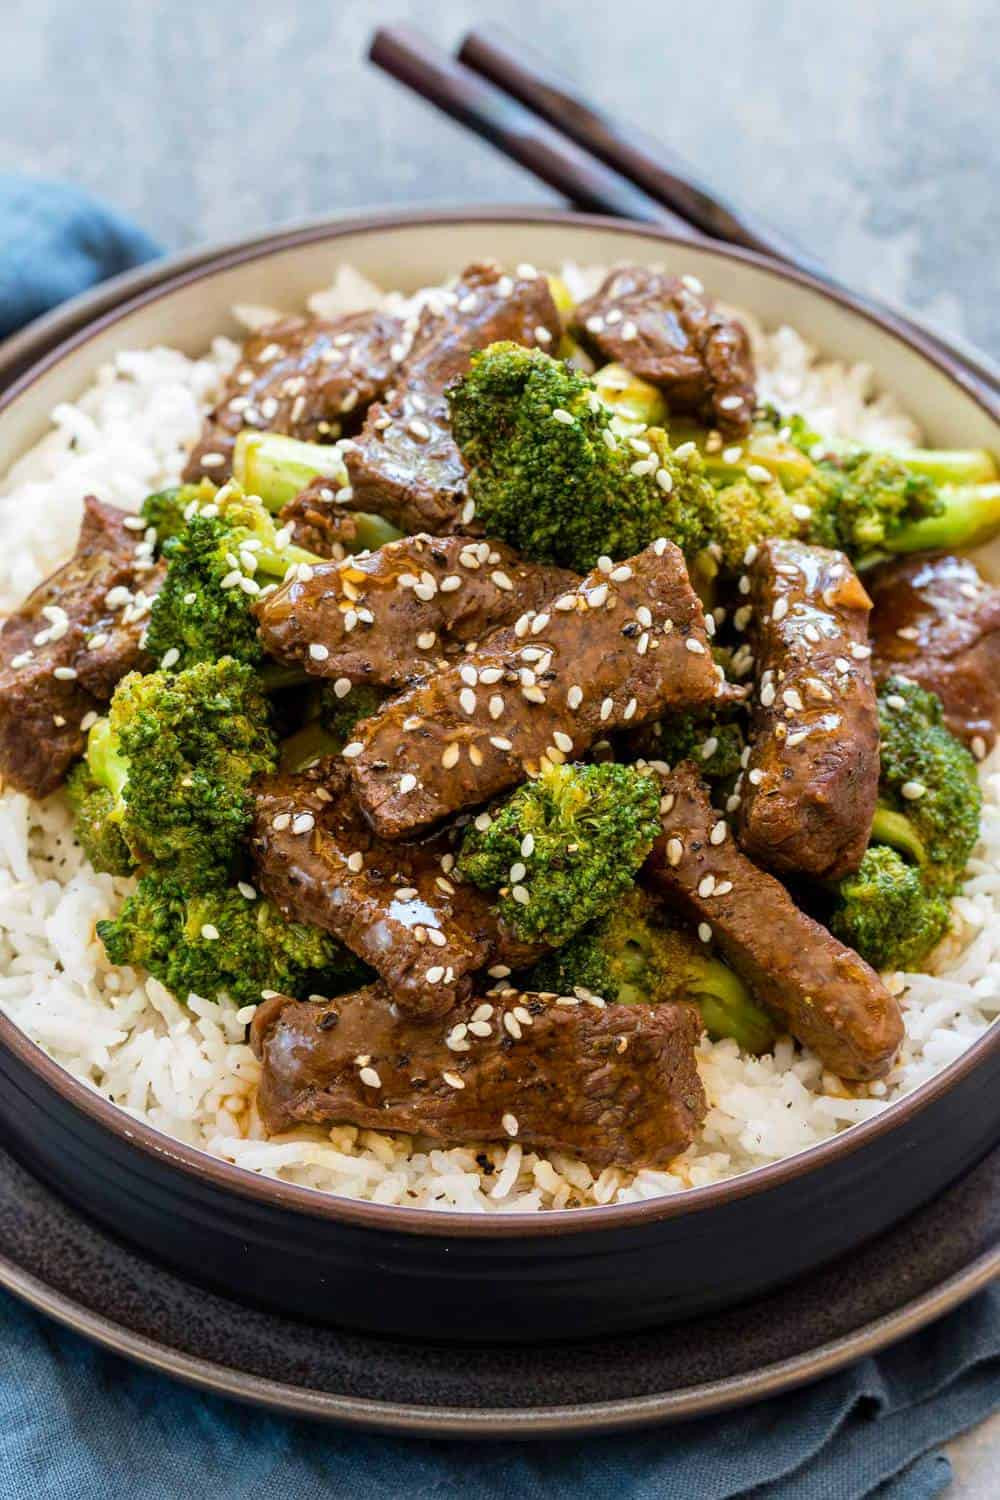 Broccoli In Instant Pot
 Instant Pot Beef and Broccoli